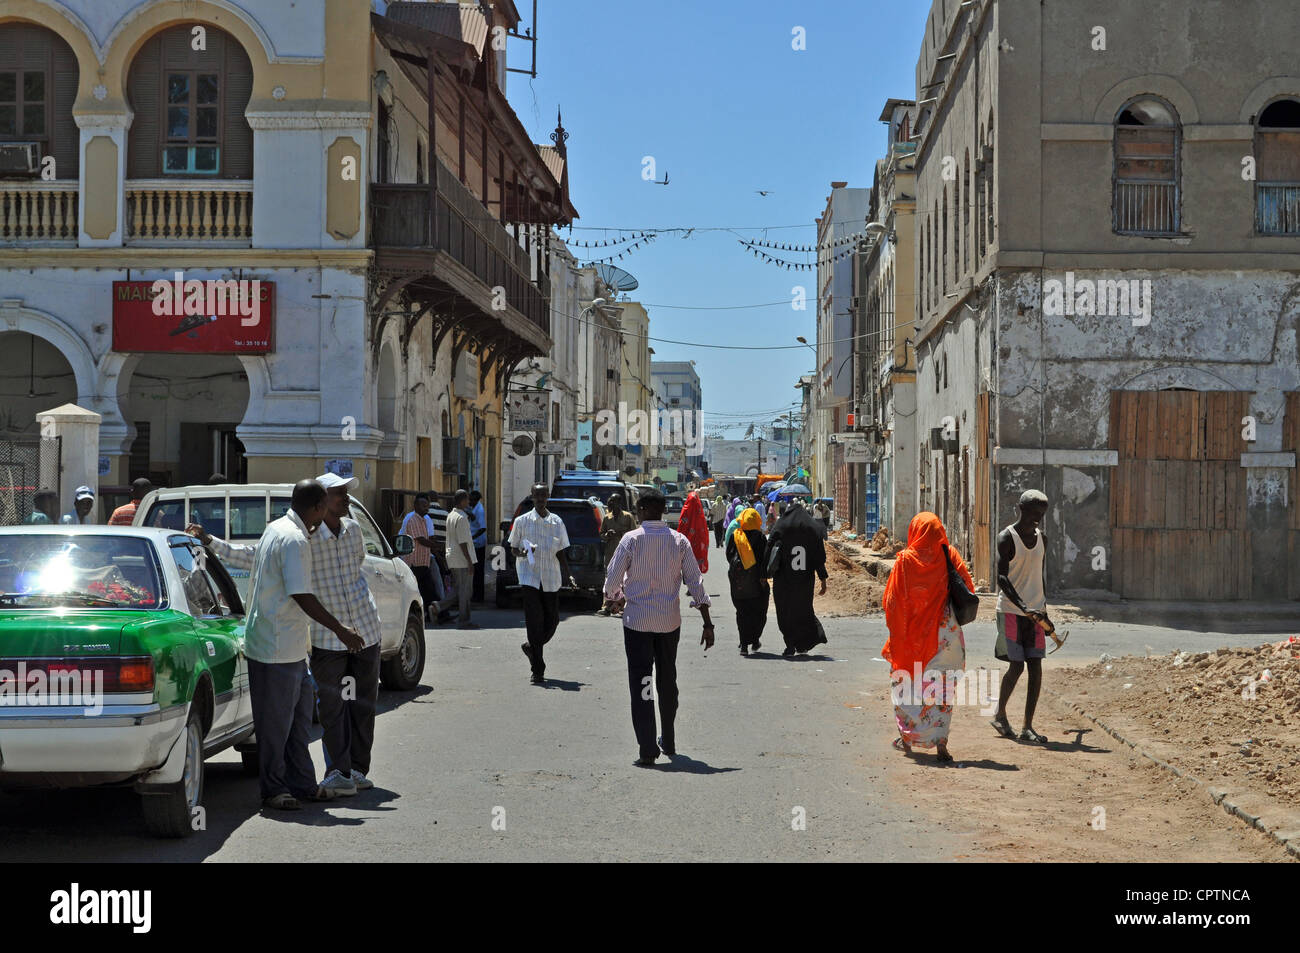 Local people walking down a road in a street scene in Djibouti City, east Africa. Stock Photo